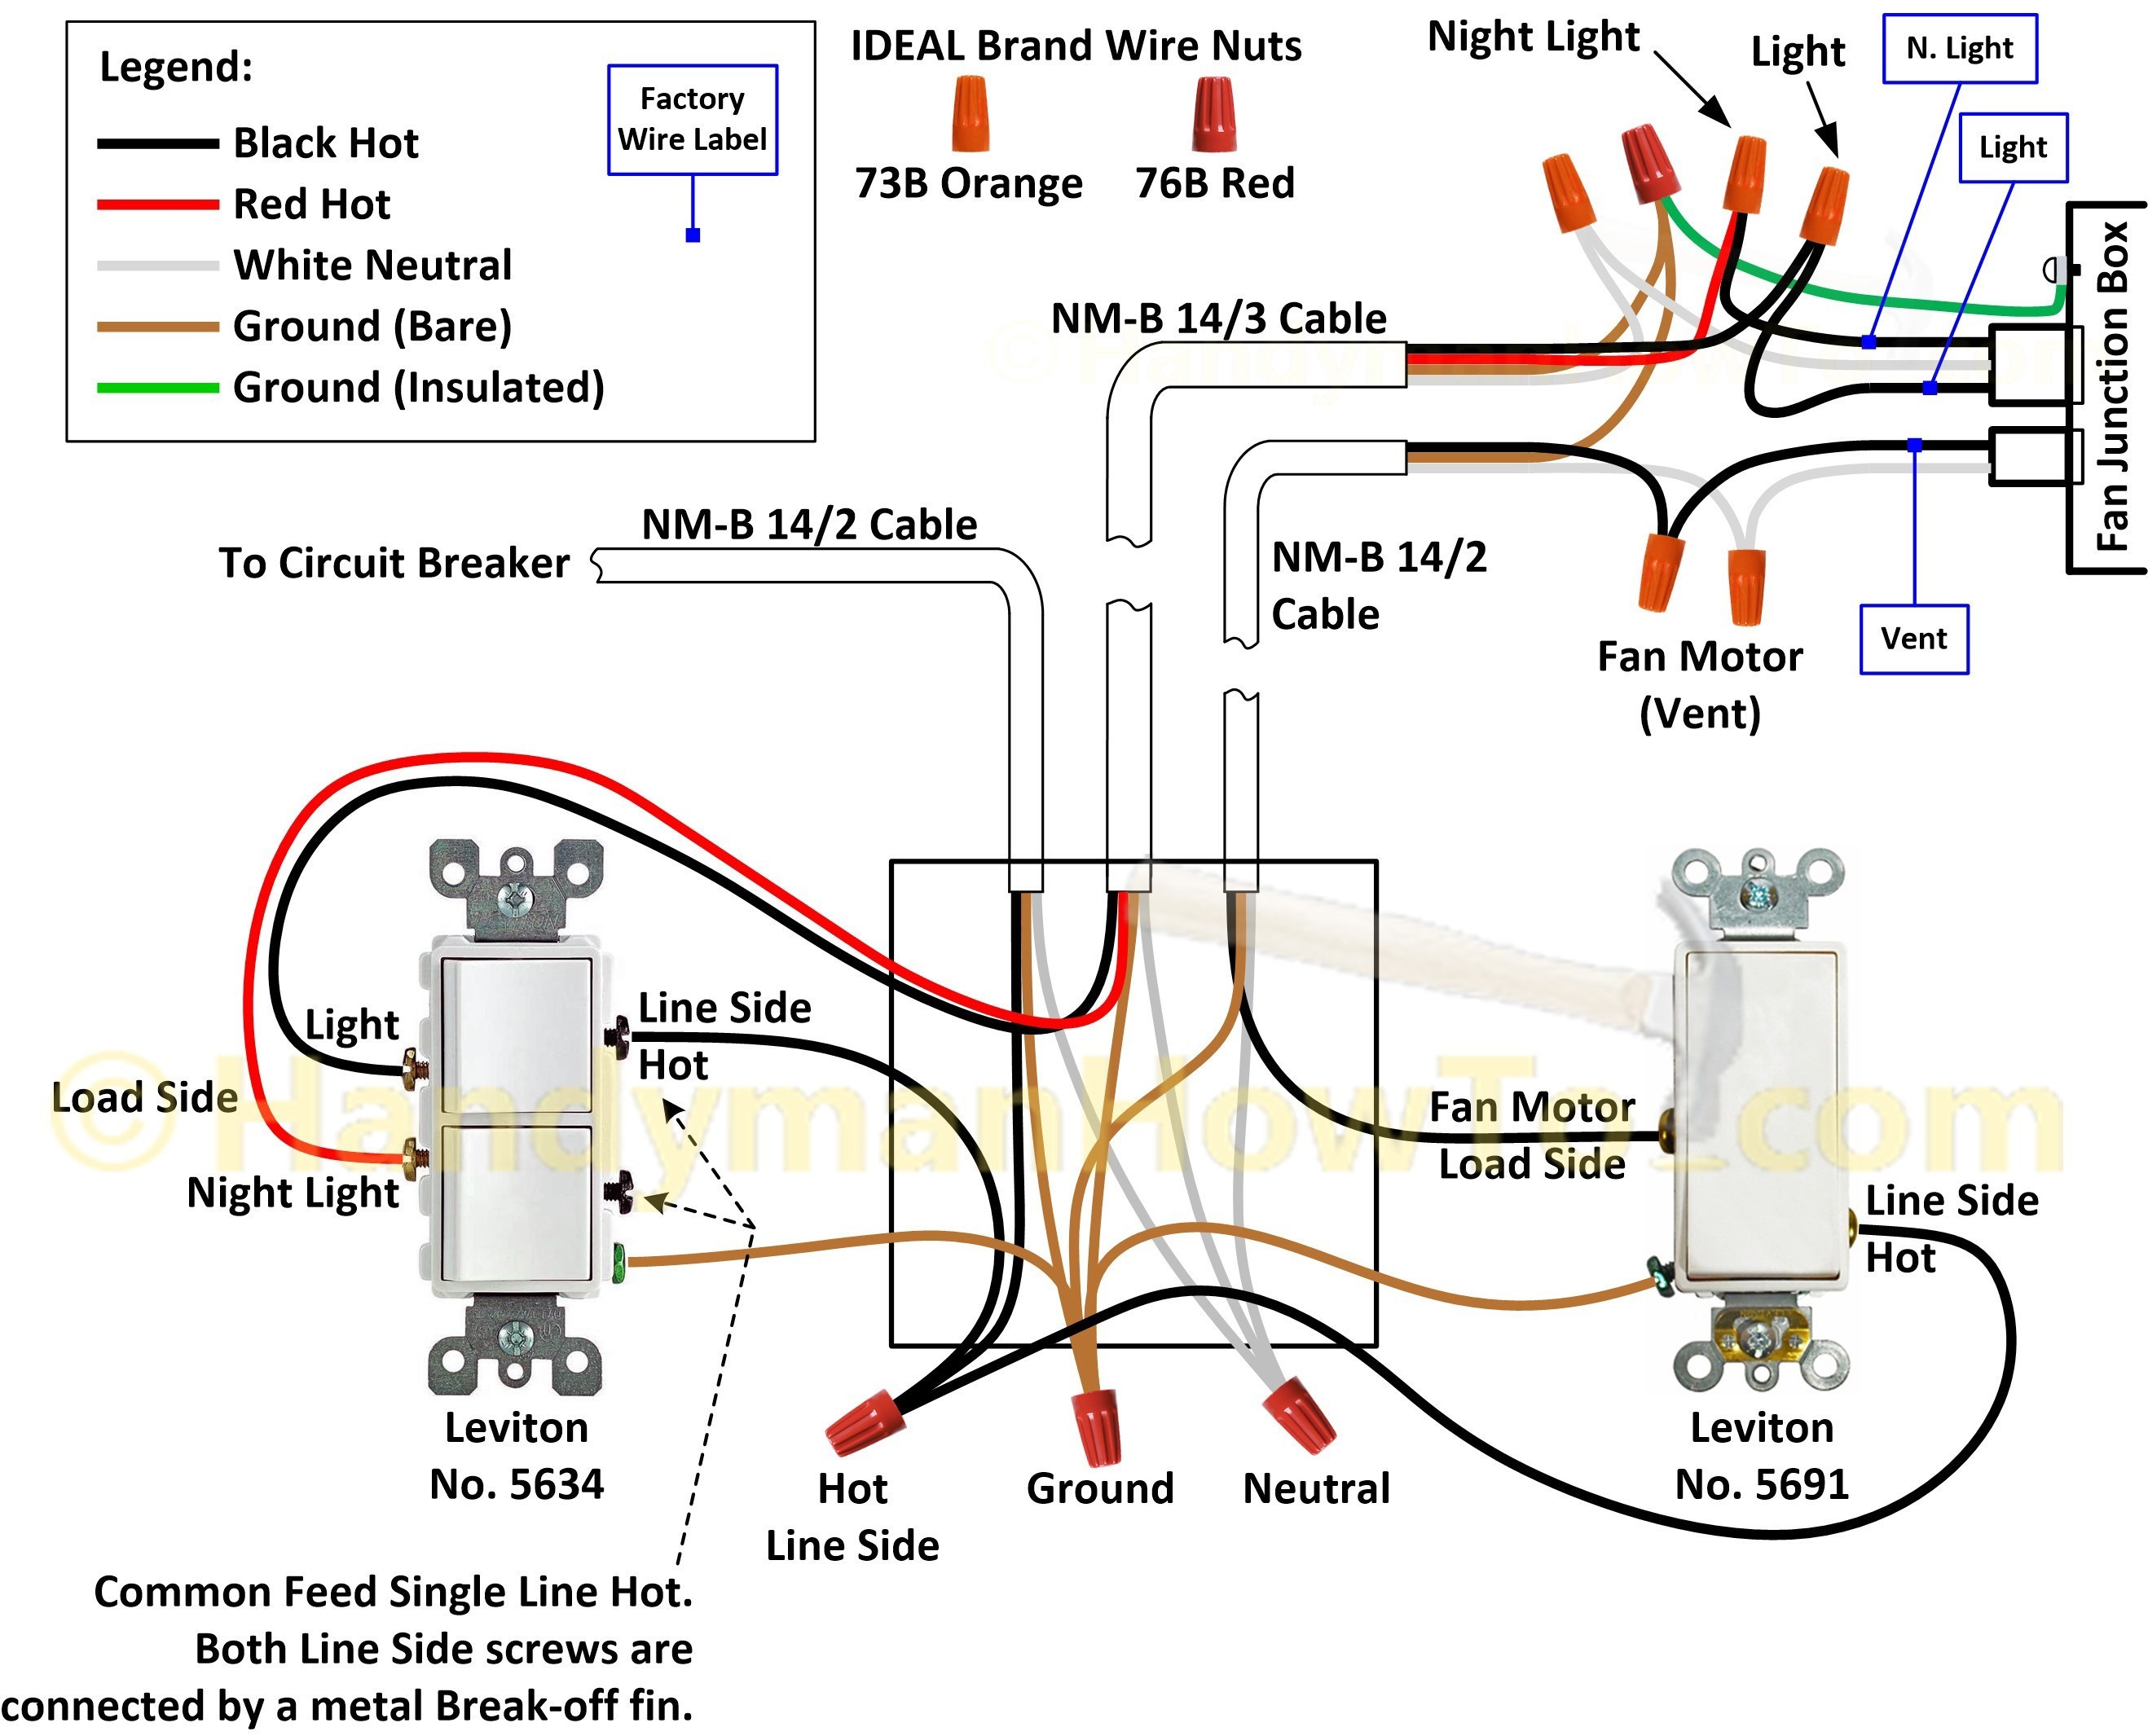 Wiring Diagram For Multiple Lights e Switch Refrence Double Light Switch Wiring Diagram New How To